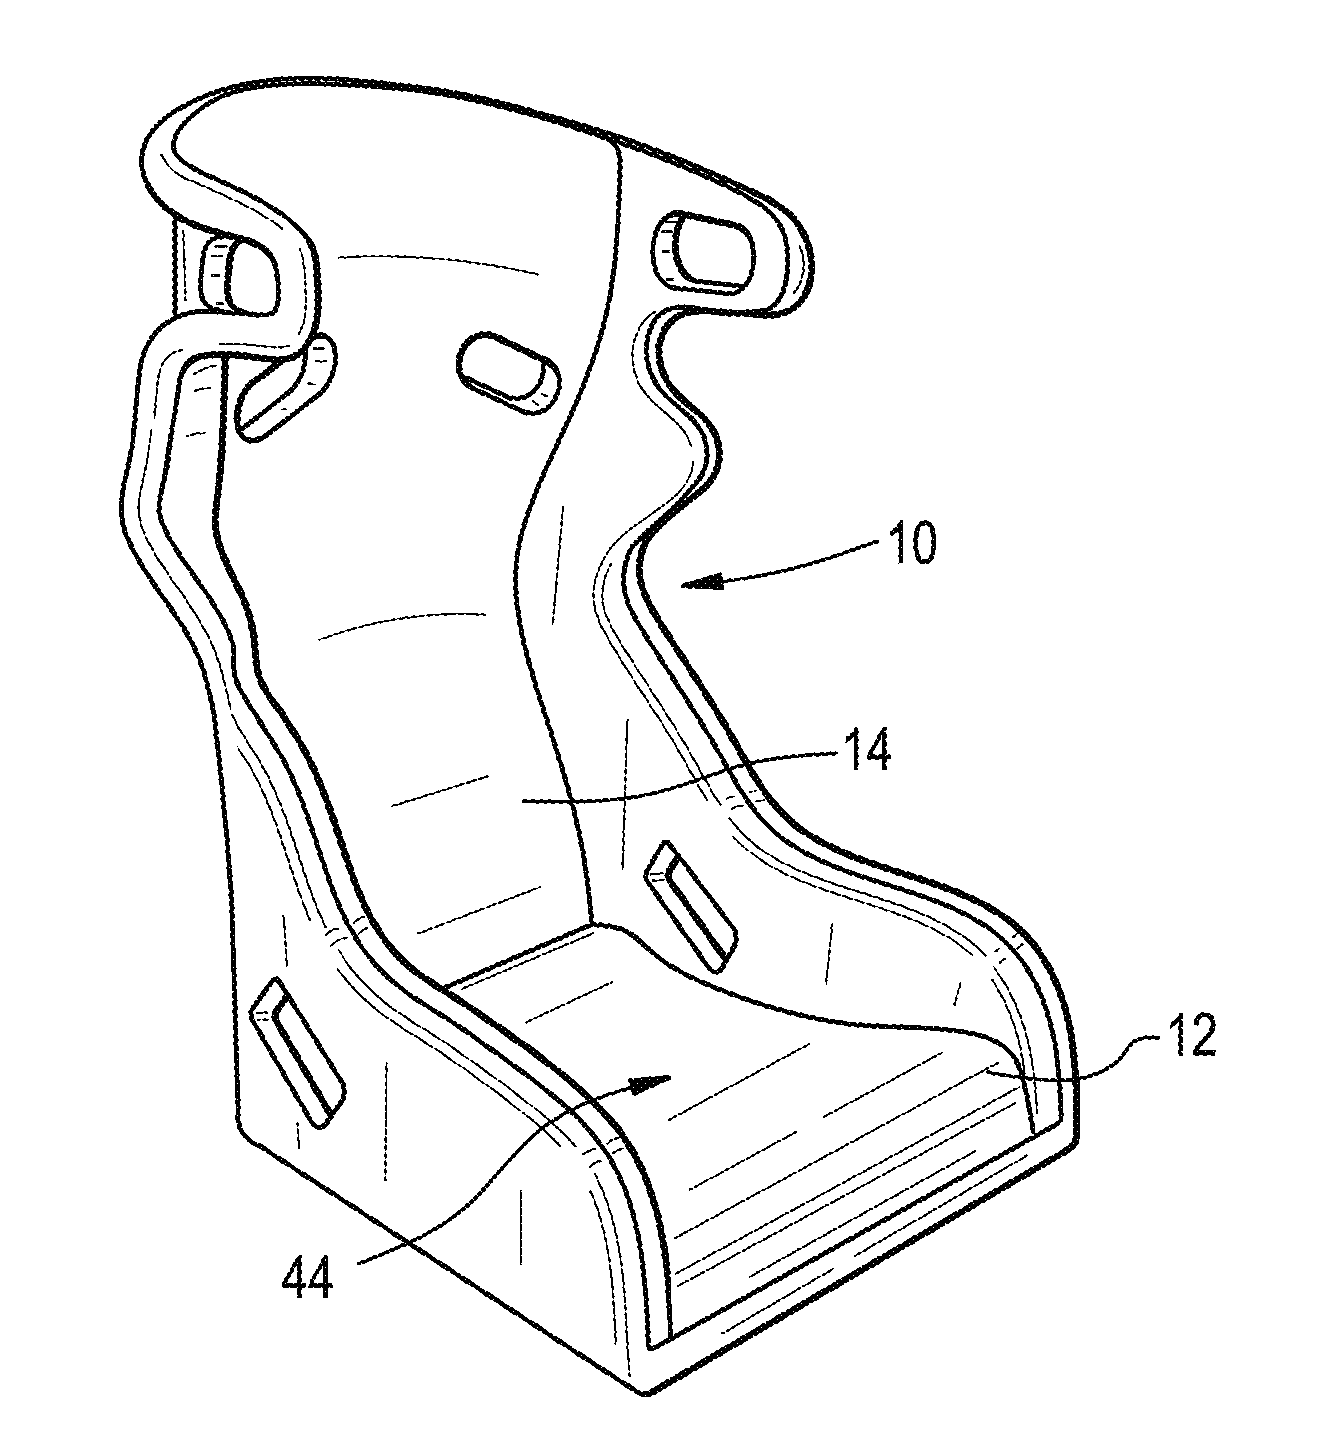 Seat for reducing the risk of spinal injuries